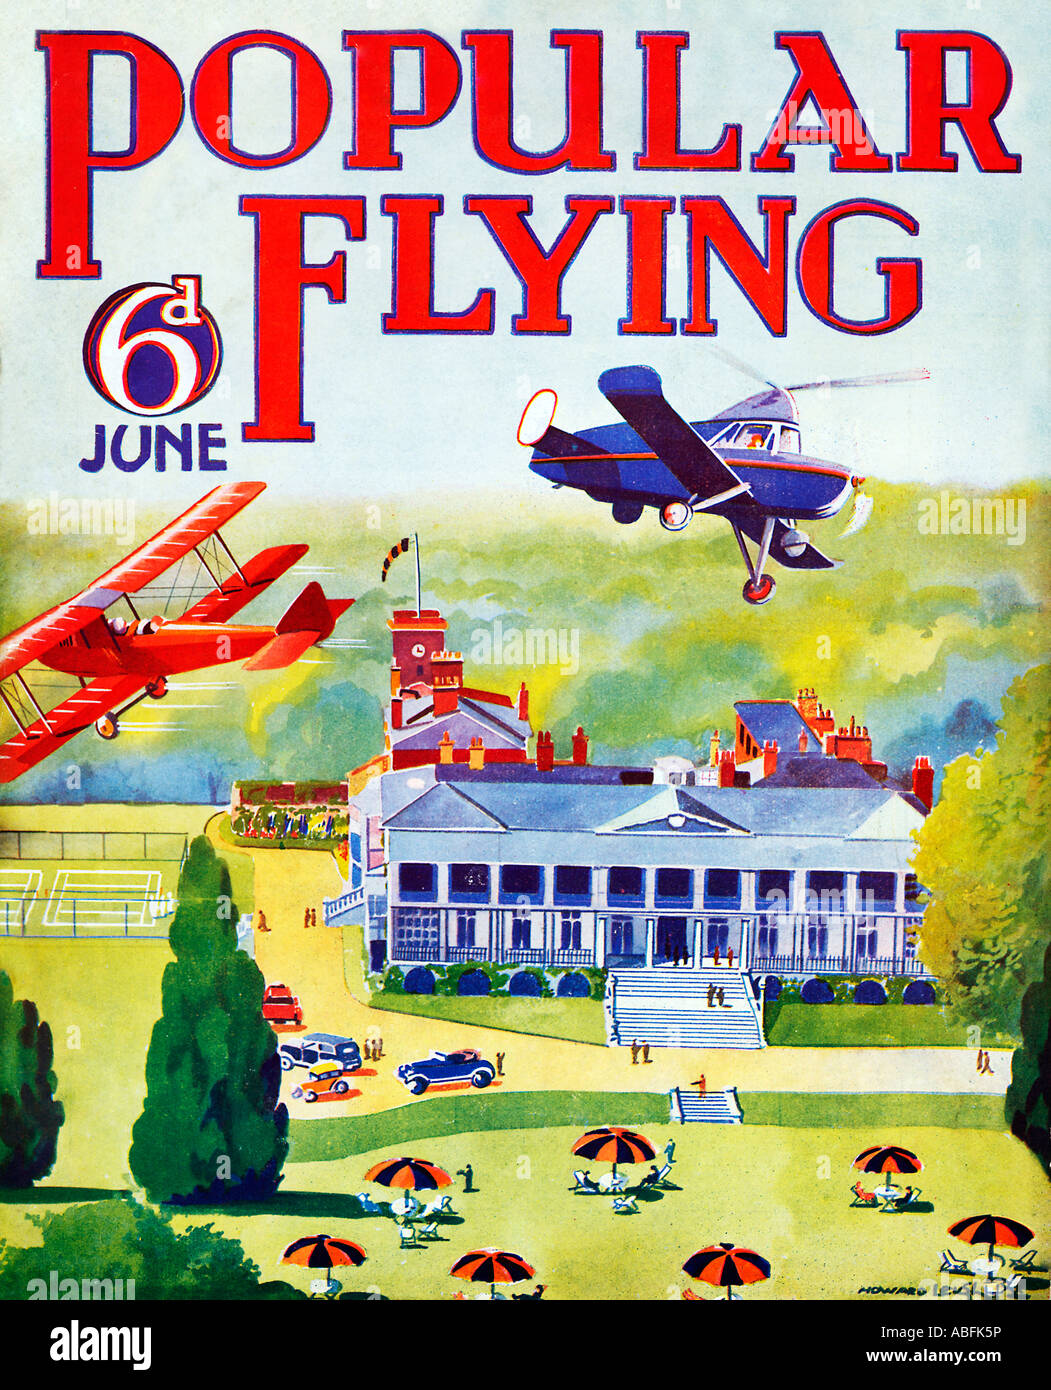 Popular Flying 1932 magazine for flying enthusiasts with a biplane and autogyro buzzing a smart country club Stock Photo